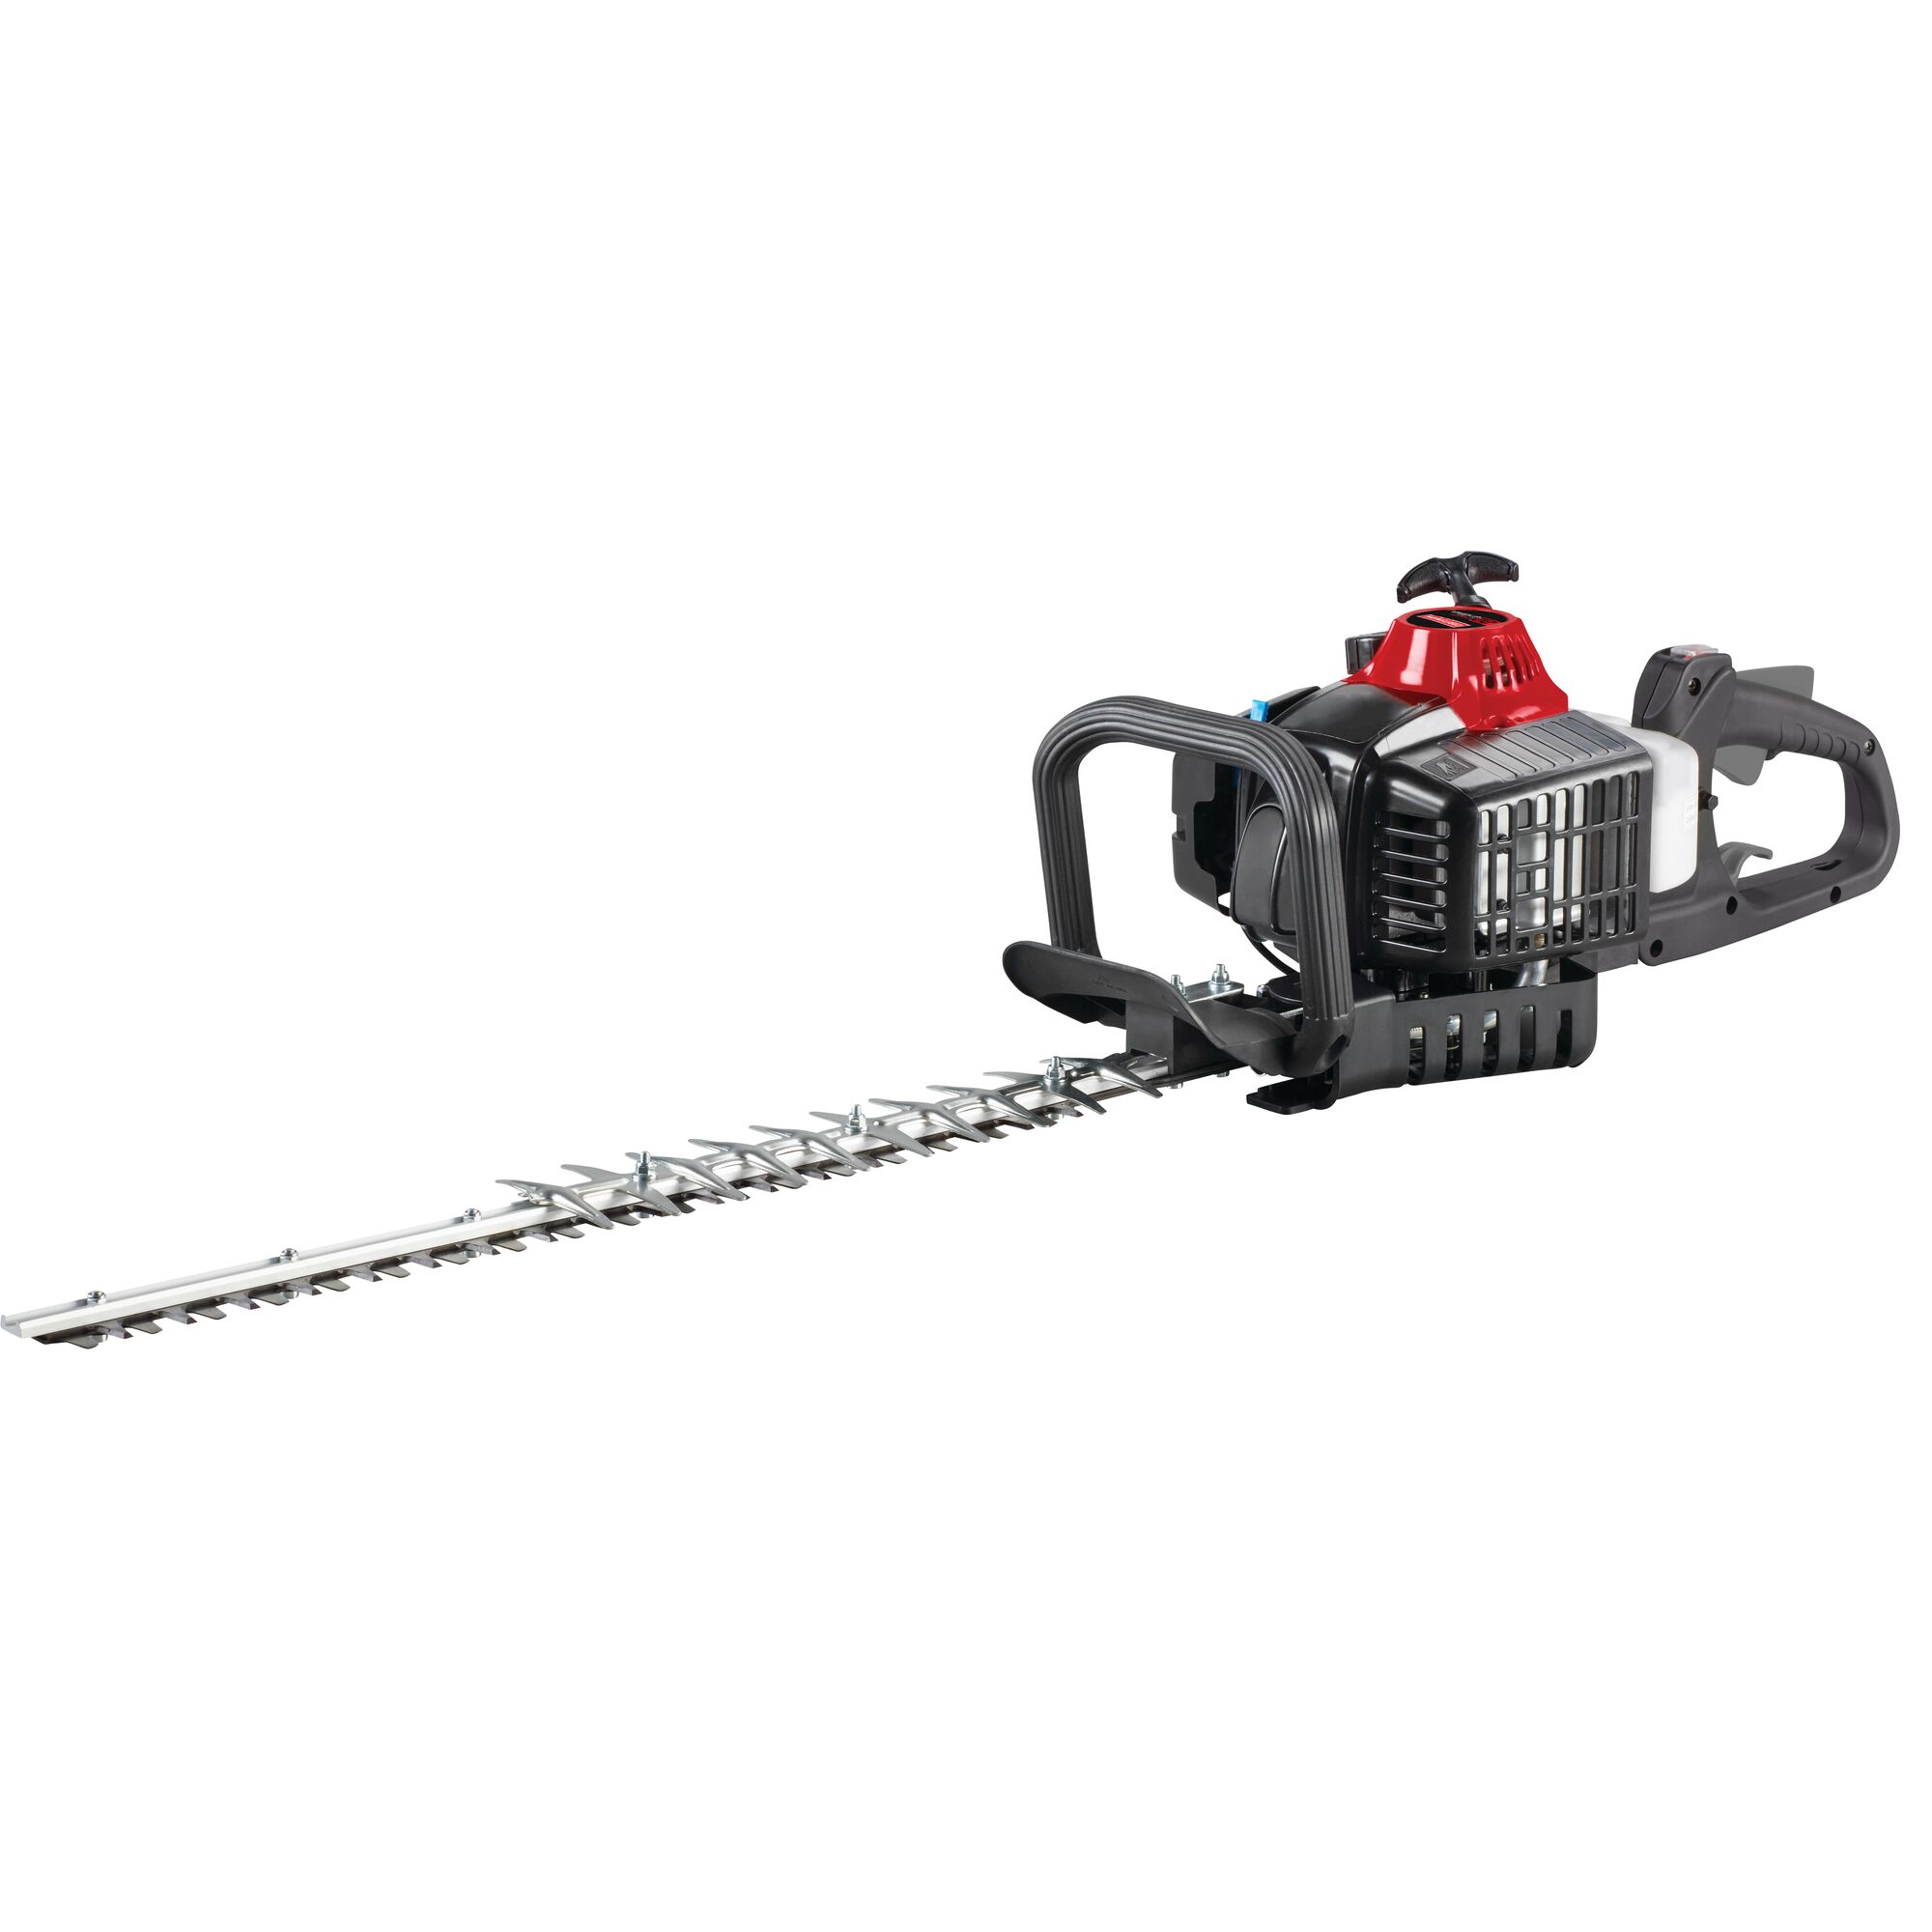 Right profile of 22 inch 2 cycle gas hedge trimmer.